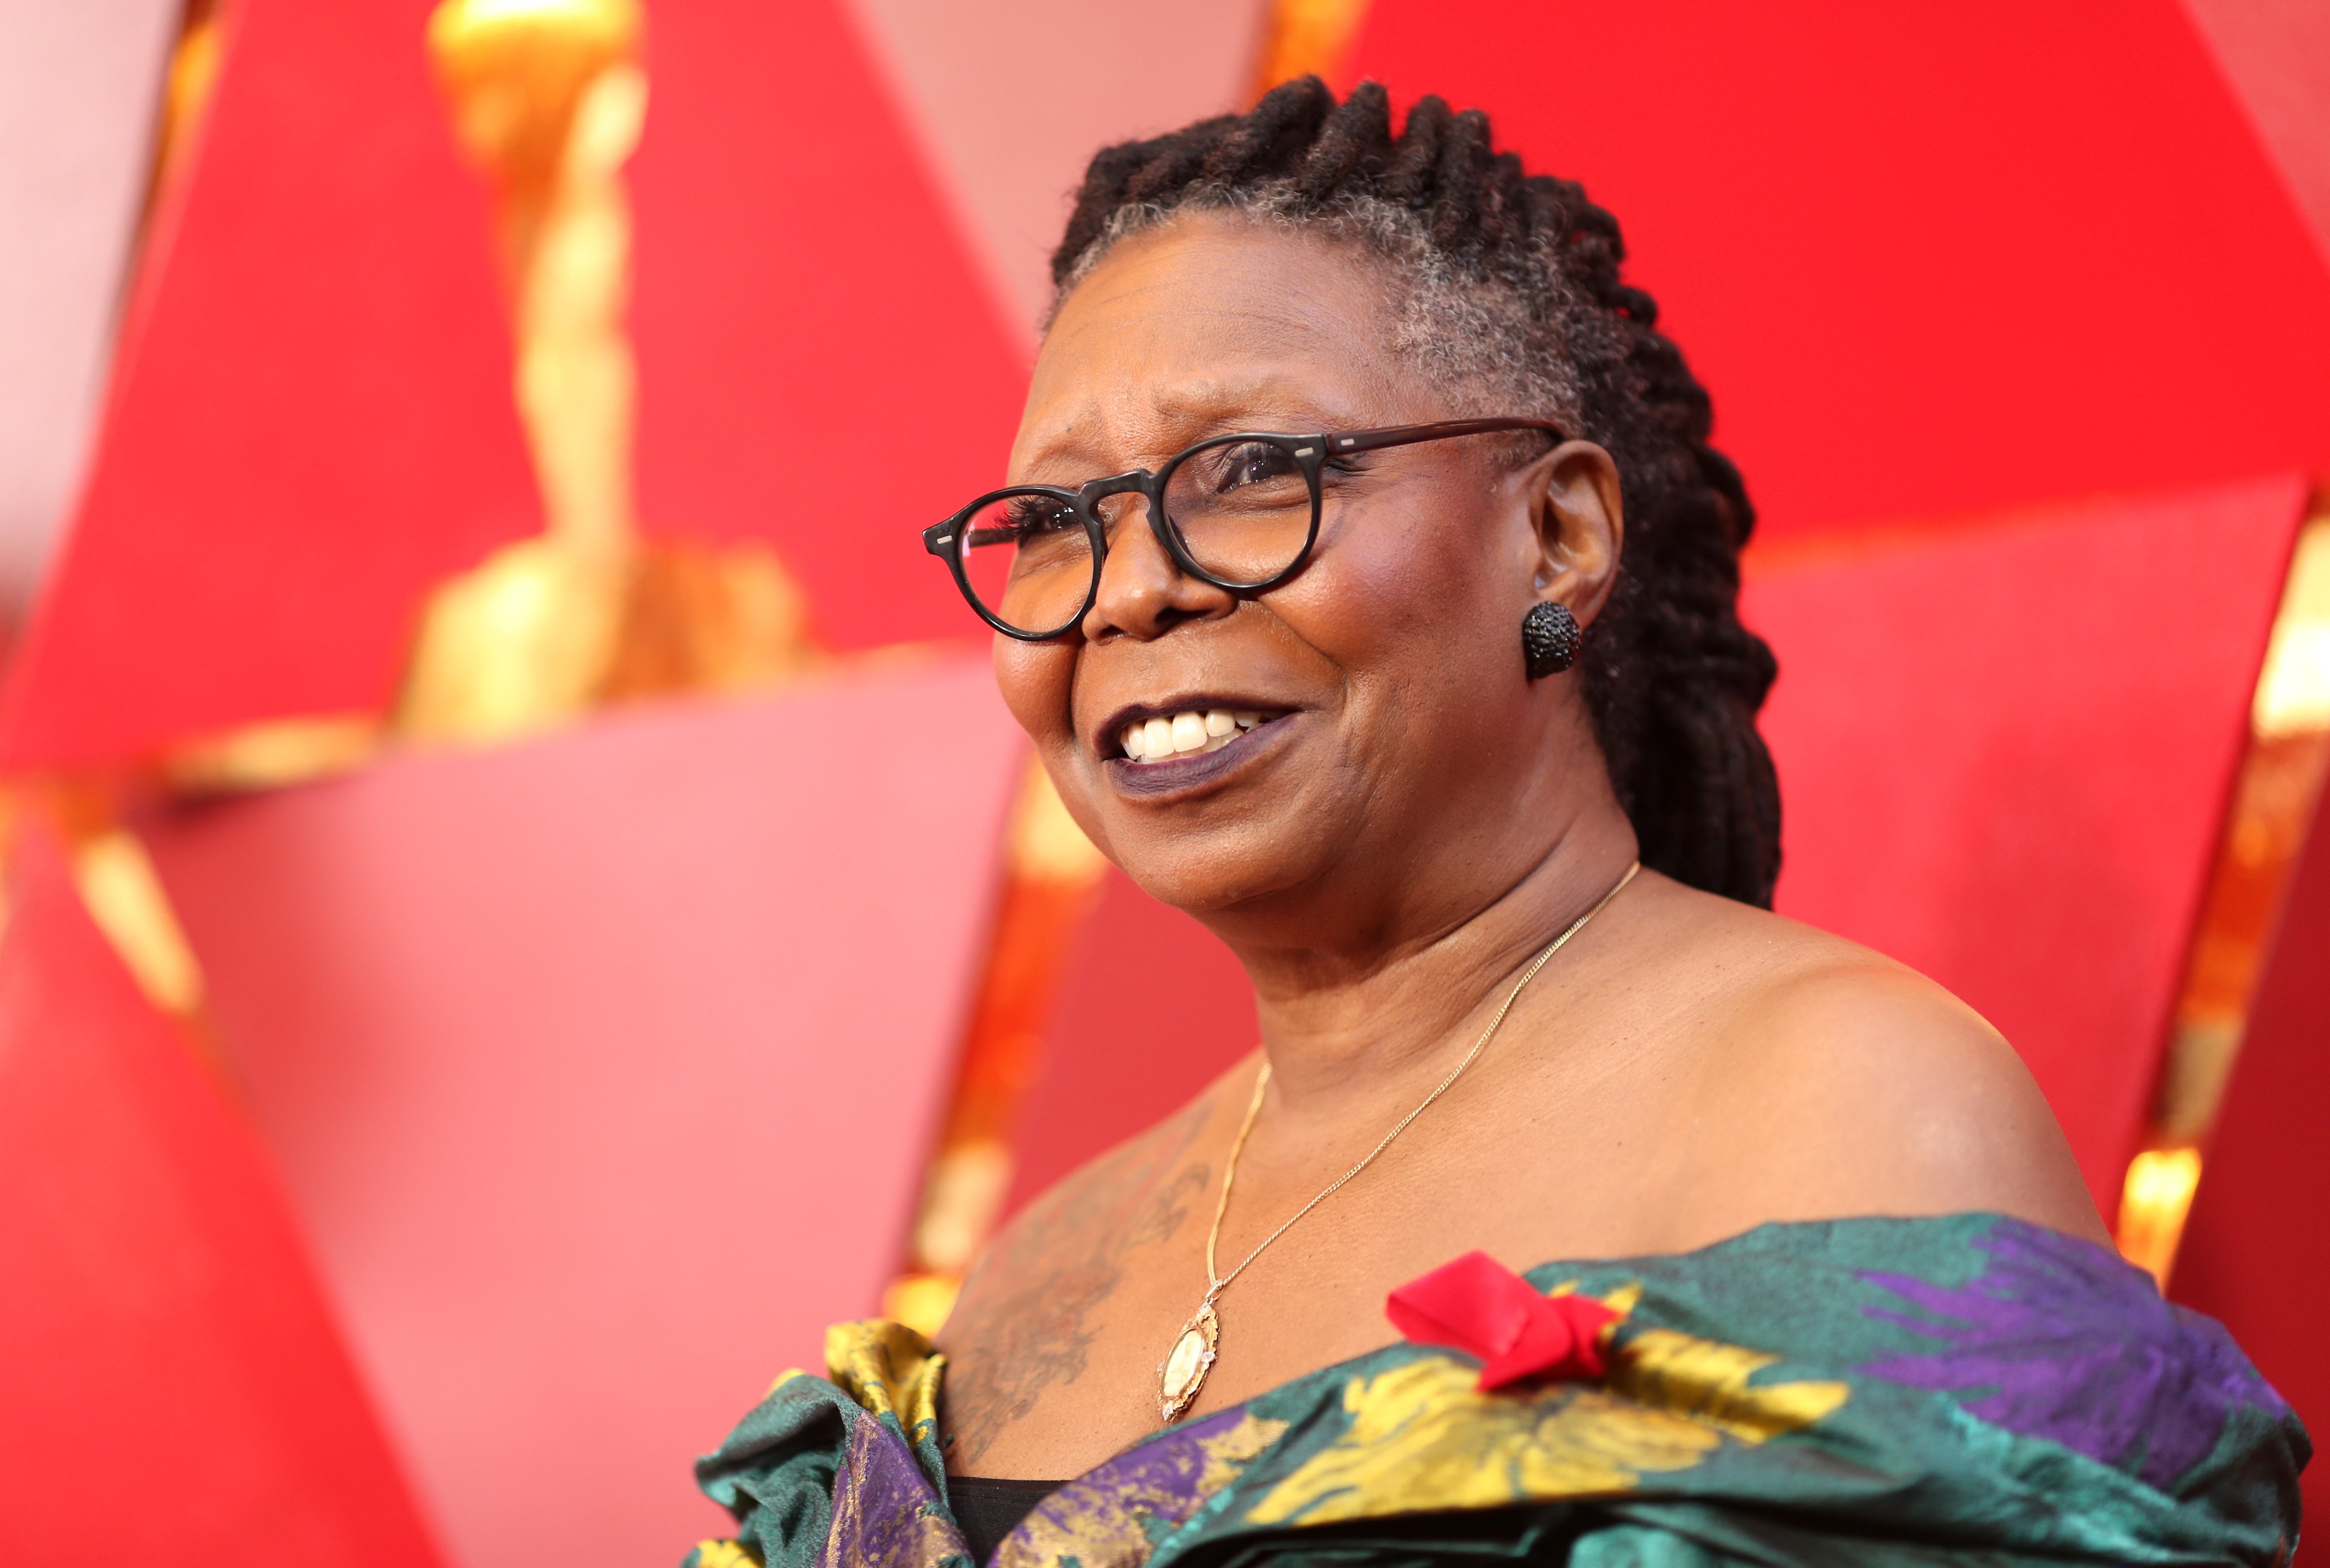 Whoopi Goldberg at the 90th Annual Academy Awards at Hollywood & Highland Center on March 4, 2018 in Hollywood, California.| Source: Getty Images